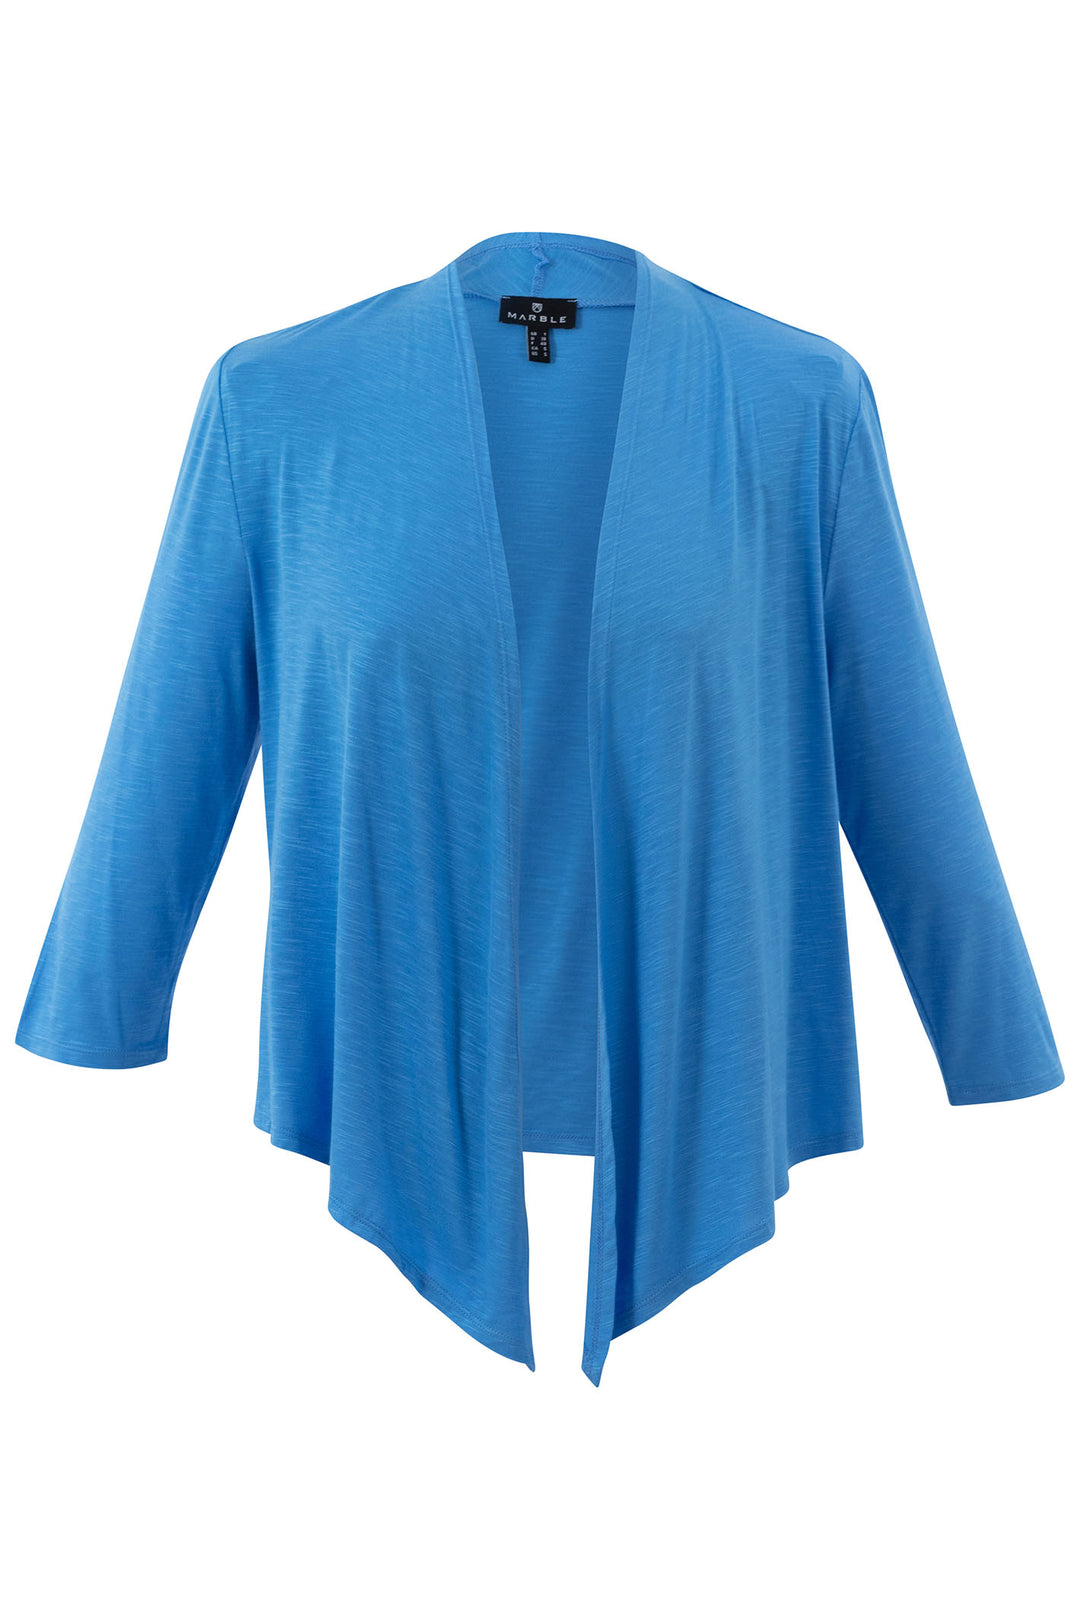 Marble Fashions 6541 213 Blue Waterfall Jersey Cardigan Shrug - Experience Boutique